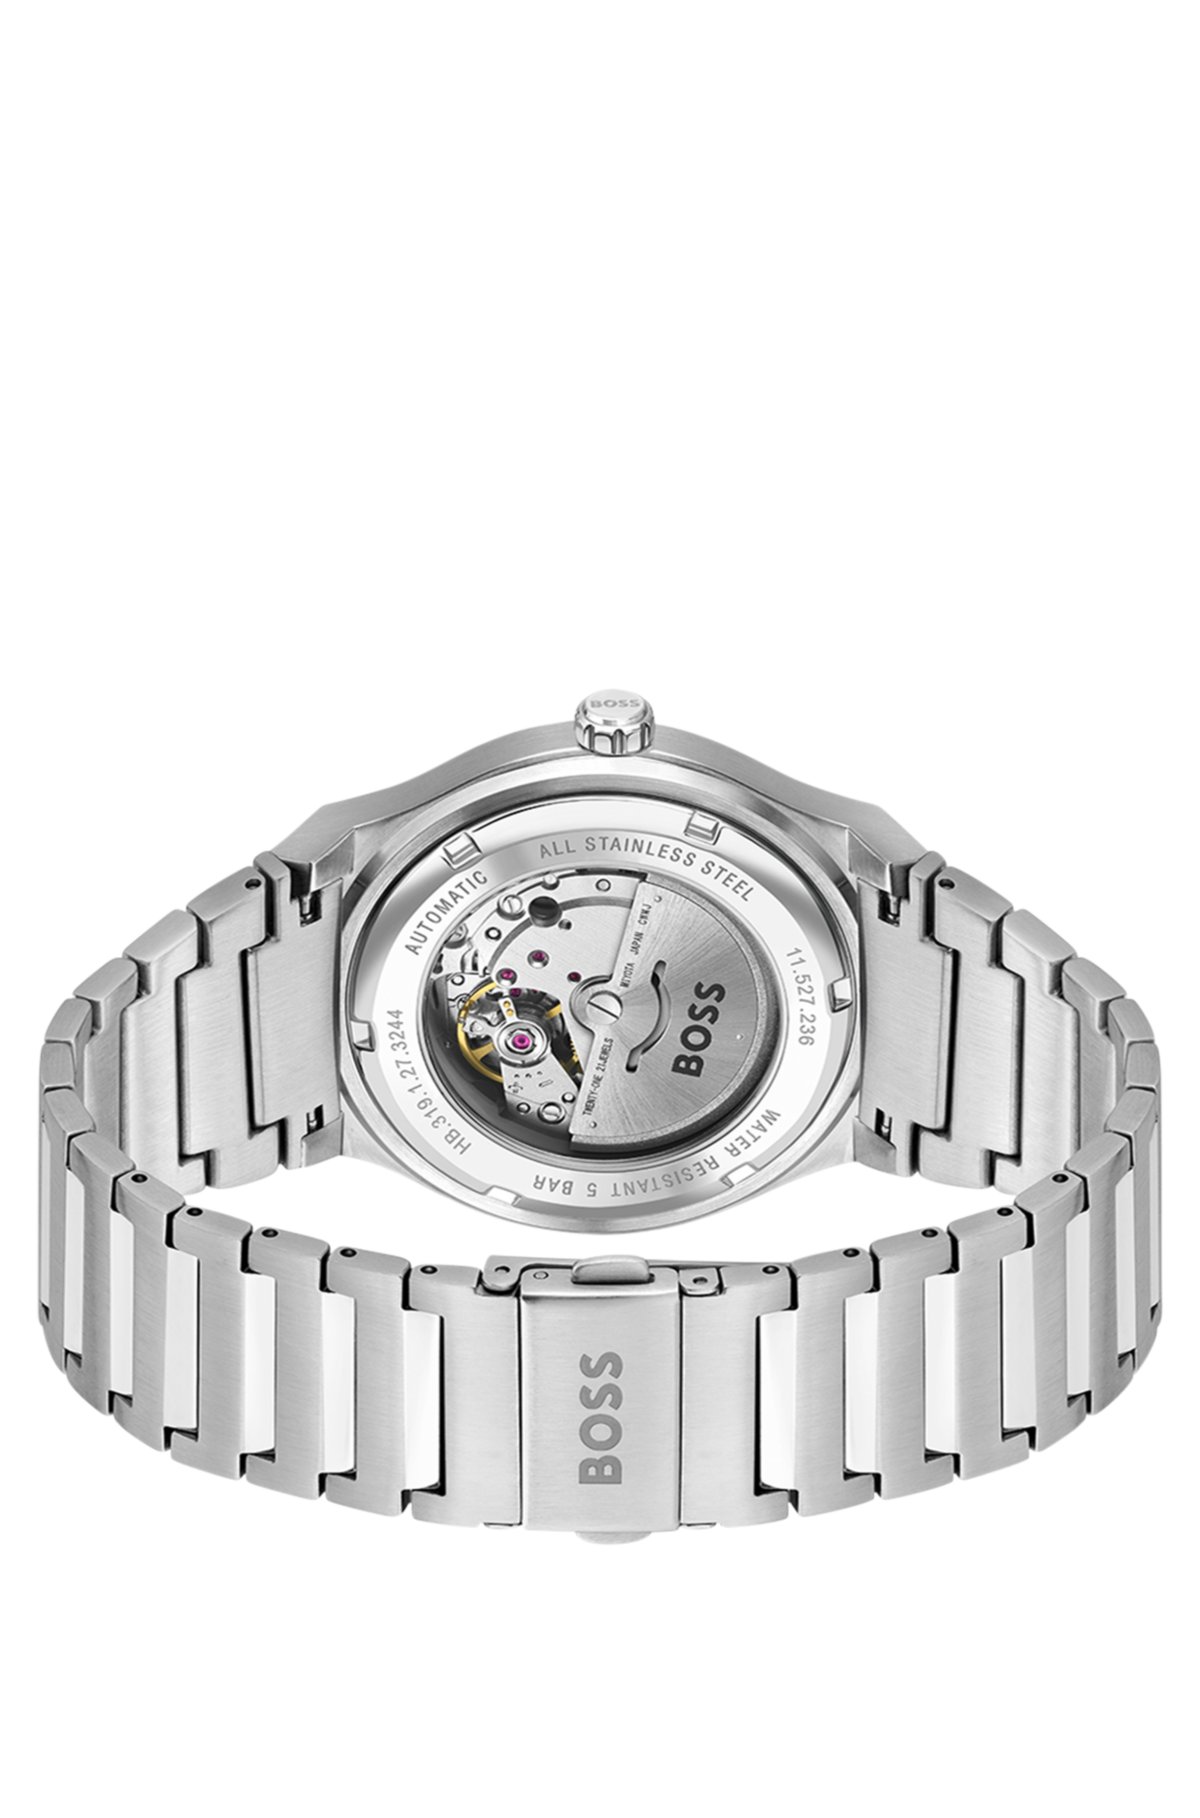 groove-textured Link-bracelet with automatic dial watch BOSS -